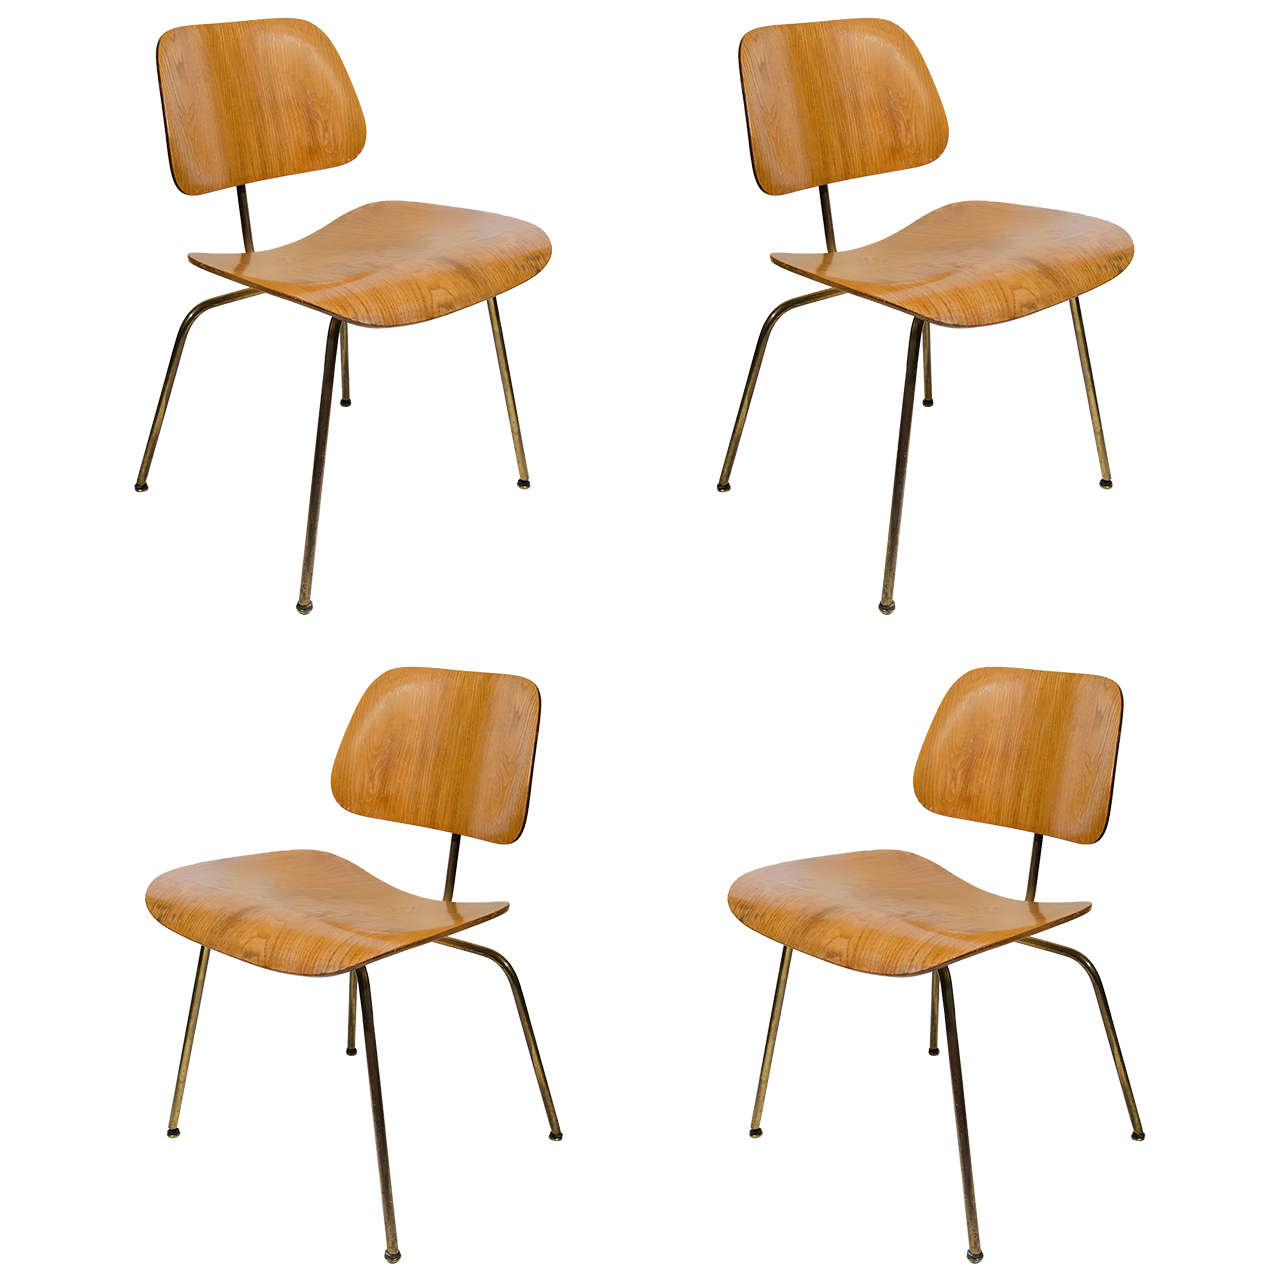 Set of Four Iconic Modernist Bentwood Chairs Designed by Eames for Herman Miller